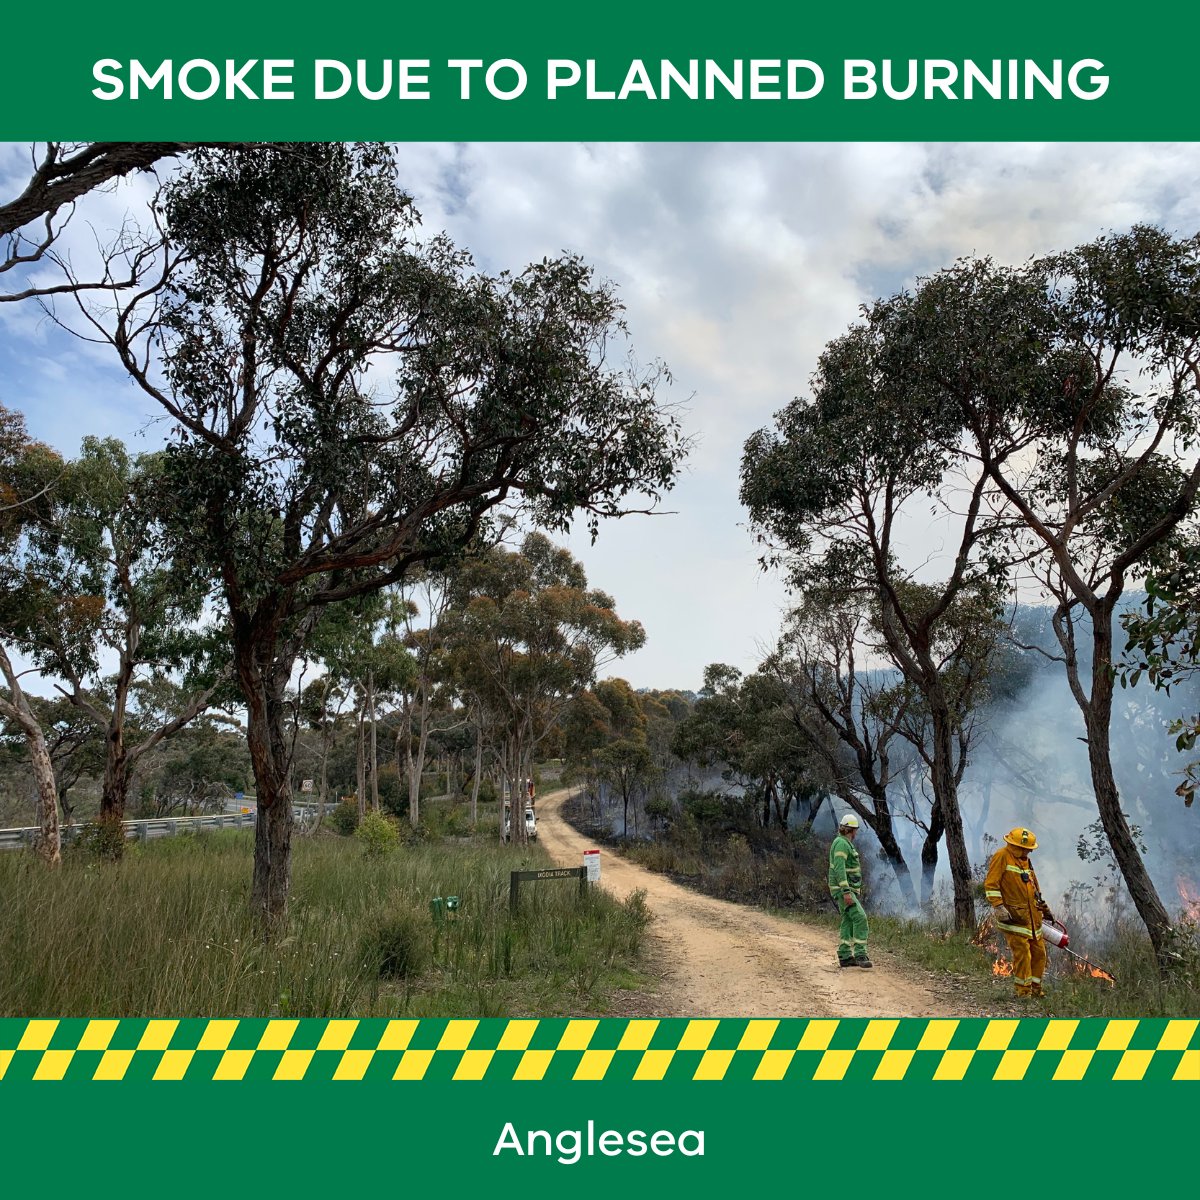 People in #Anglesea may see smoke on today as our crews carry out #PlannedBurning. See details at vic.gov.au/plannedburns #FFMVic